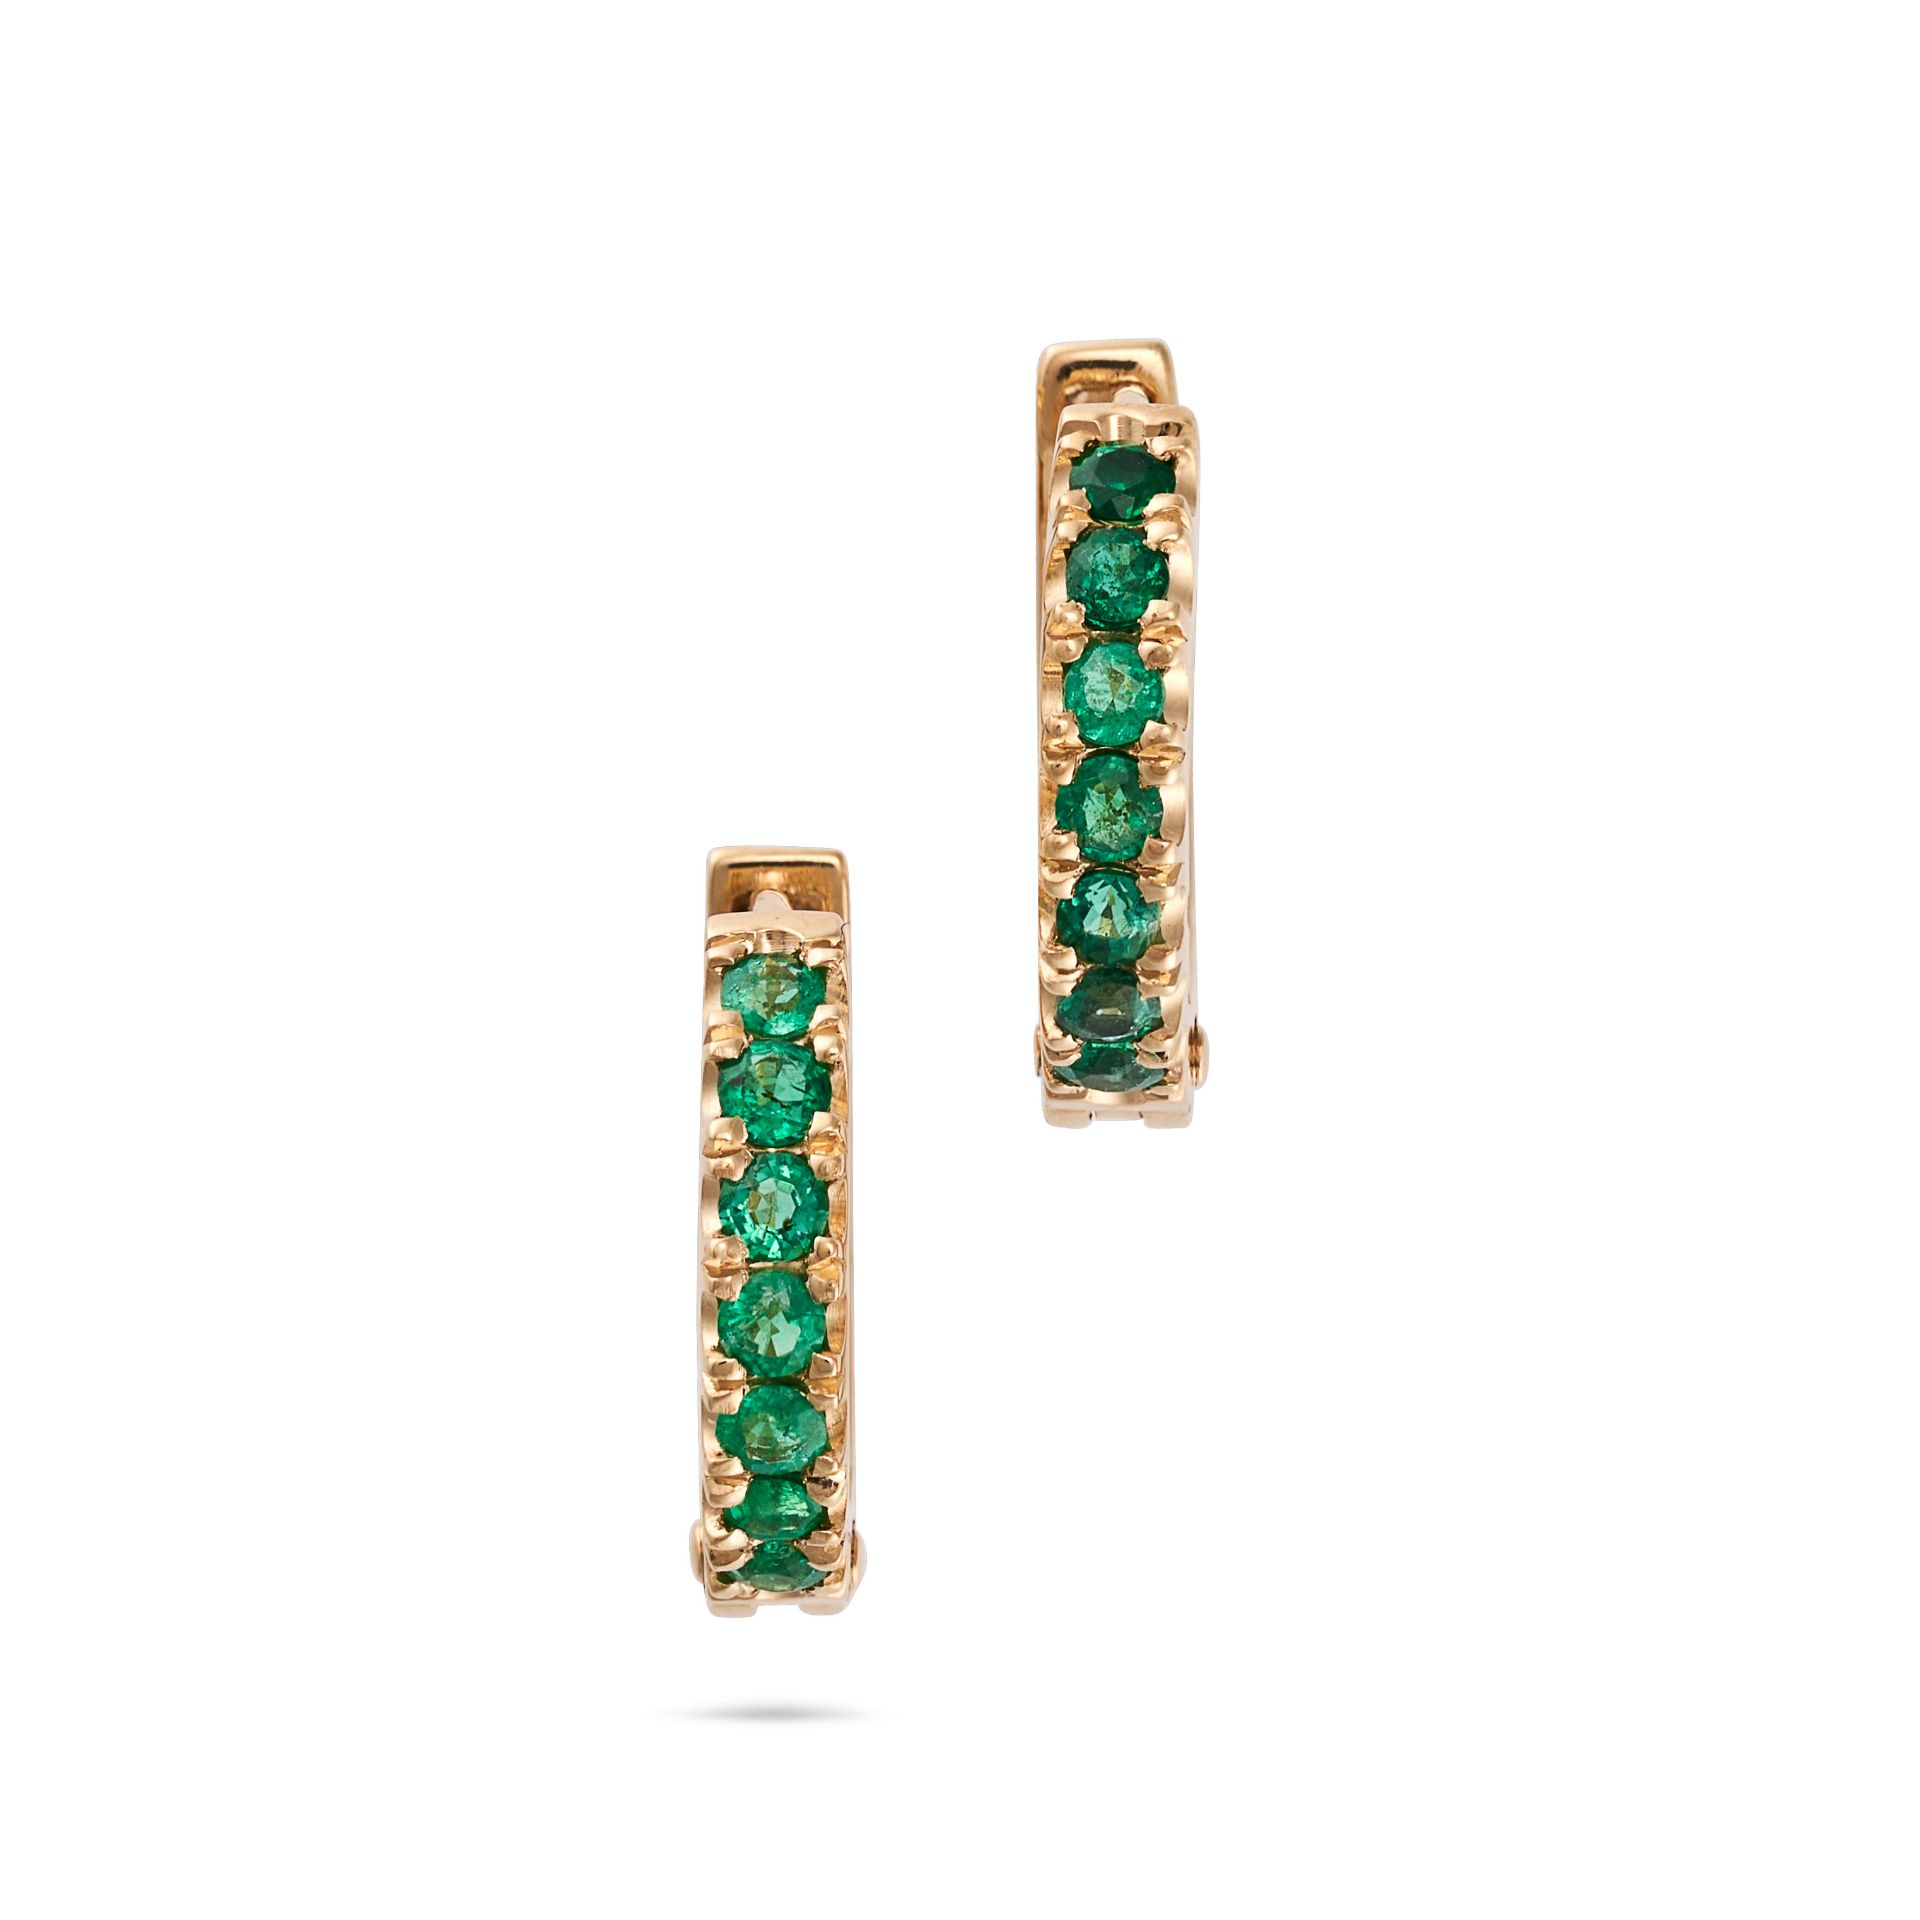 A PAIR OF EMERALD HUGGIE HOOP EARRINGS in 18ct yellow gold, each designed as a hoop set with a ro...